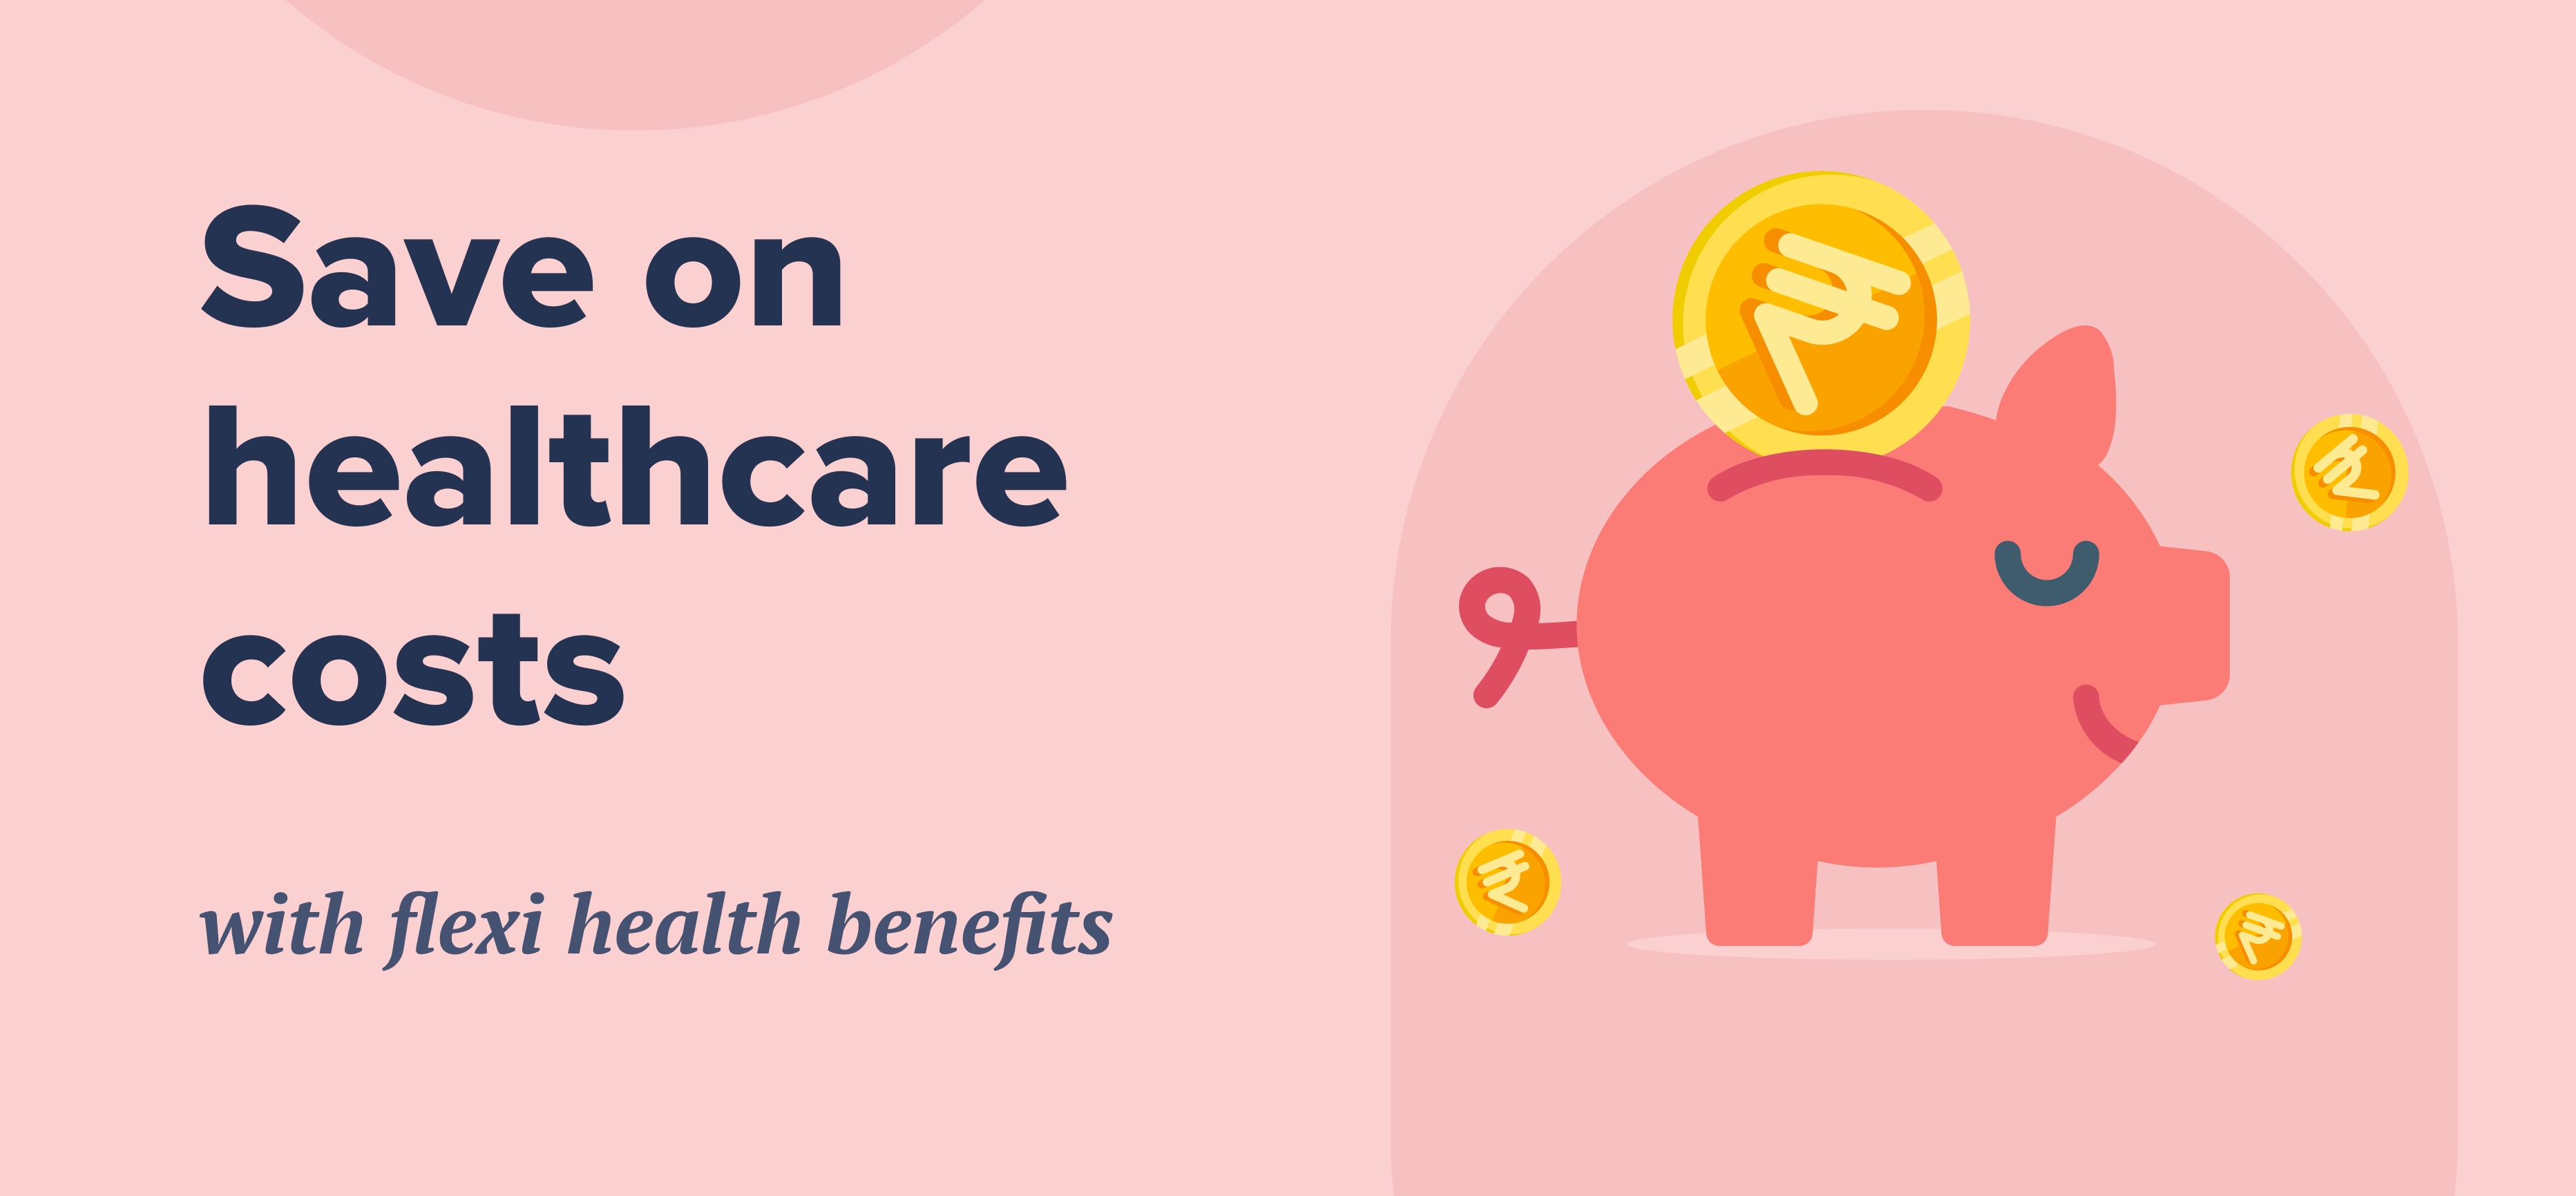 Save up to 90% on healthcare cost through Flexible Health Benefits